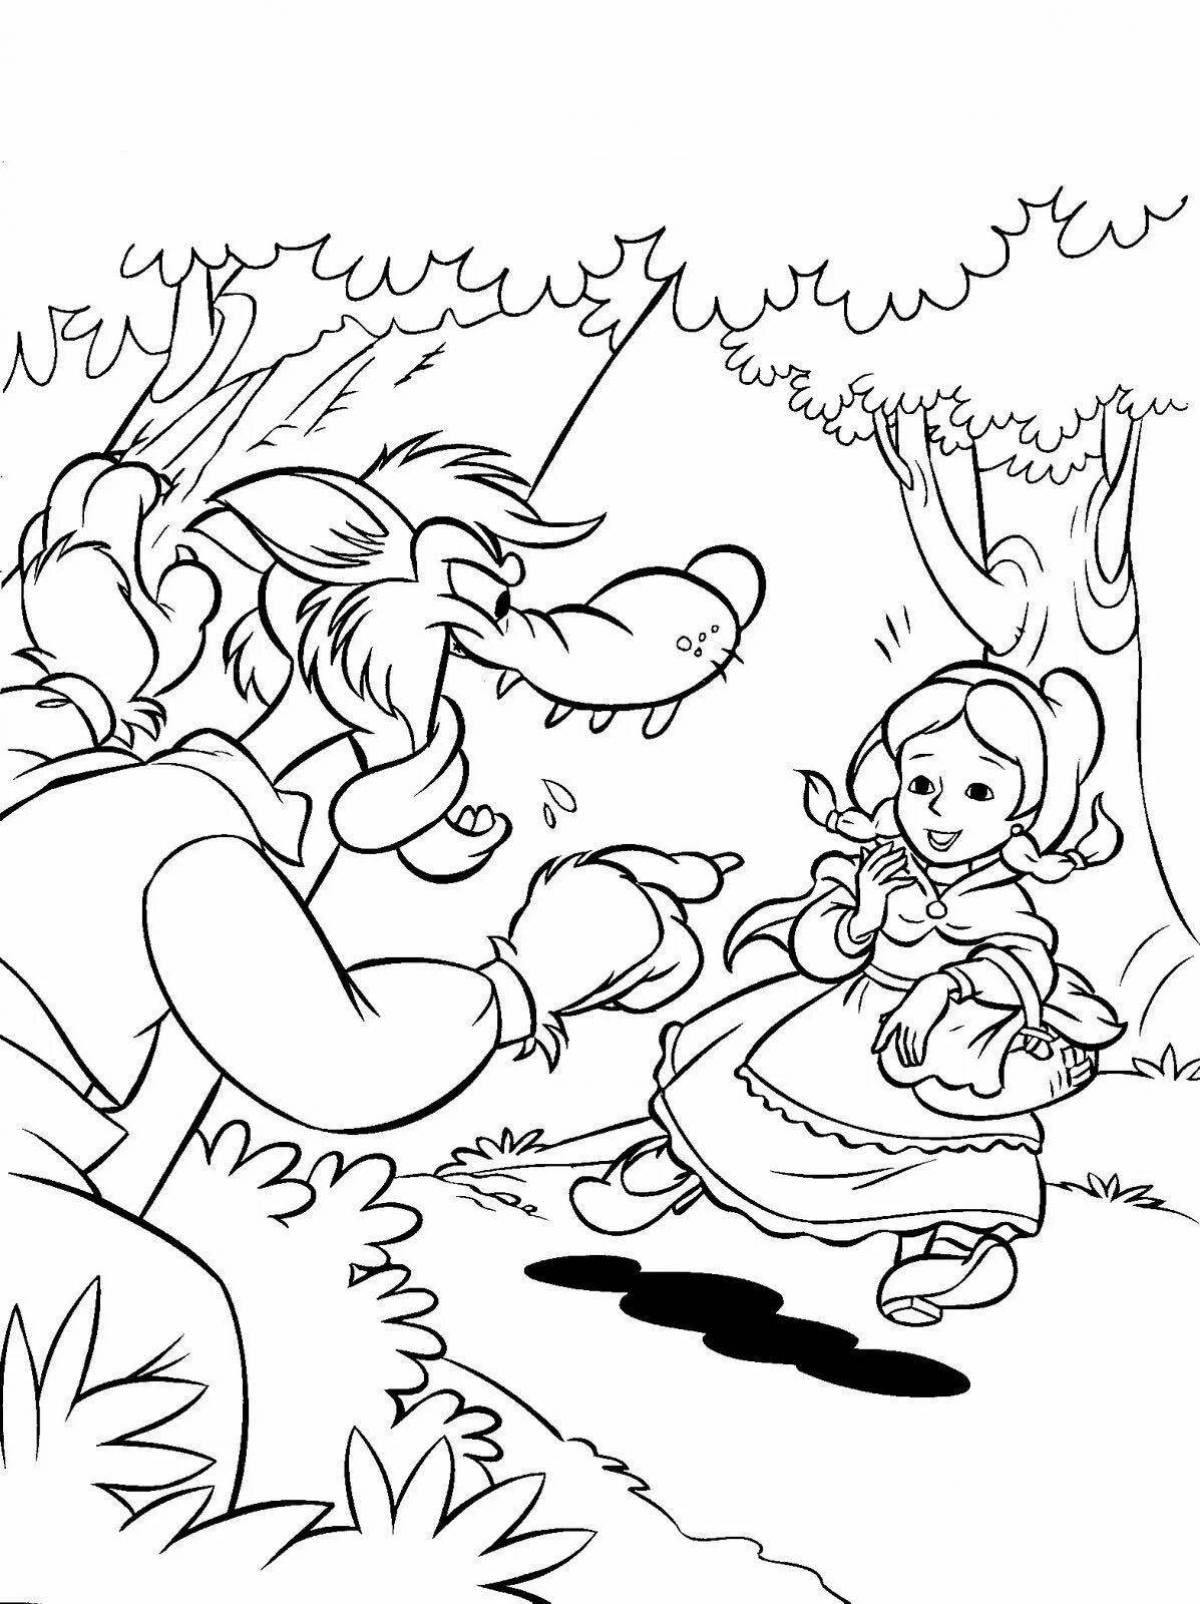 Wonderful little red riding hood coloring